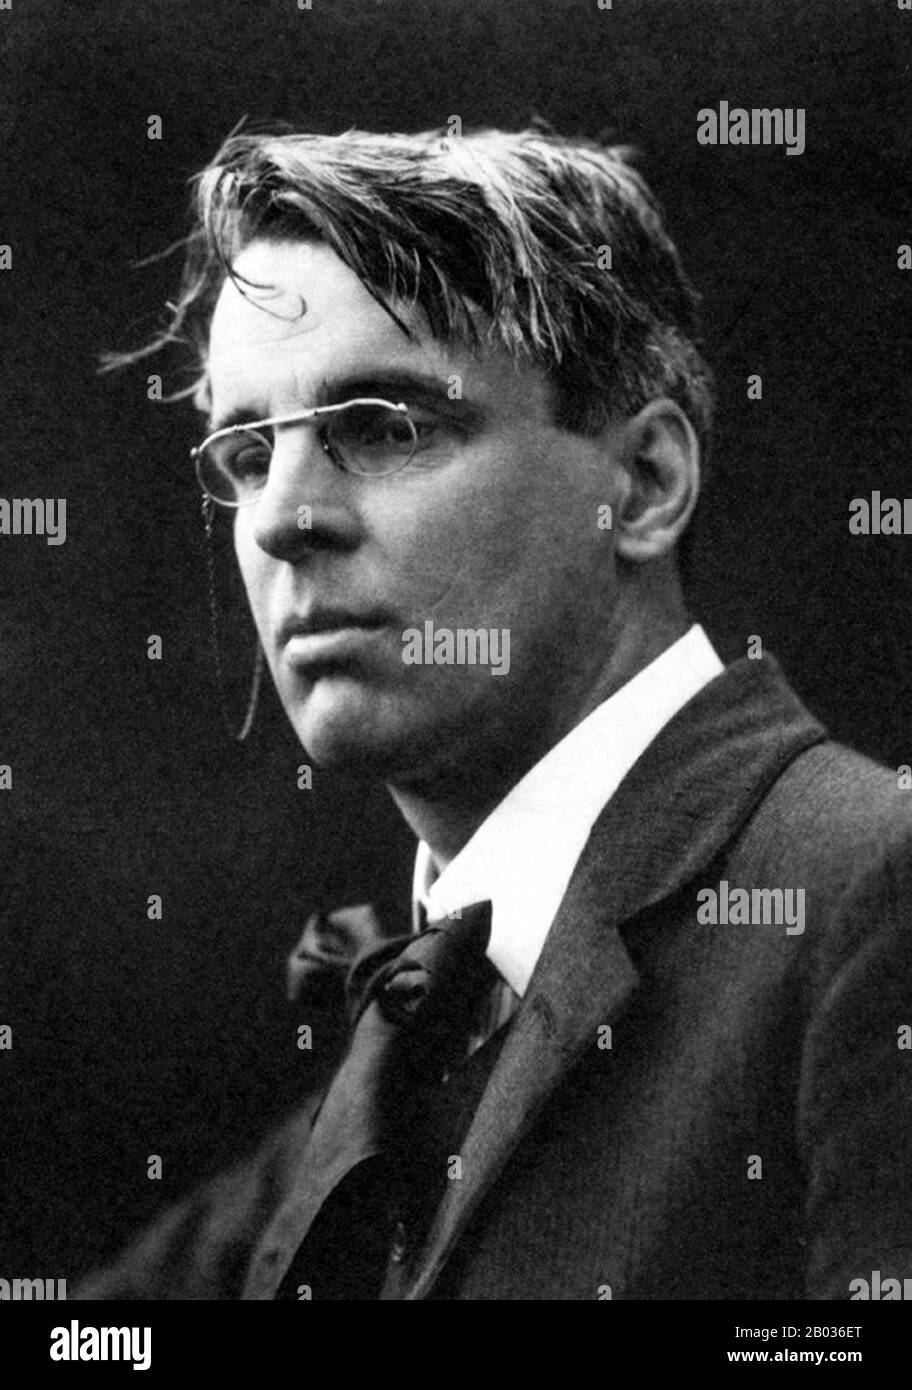 William Butler Yeats (13 June 1865 – 28 January 1939) was an Irish poet and one of the foremost figures of 20th-century literature.  A pillar of both the Irish and British literary establishments, he helped the foundation of the Abbey Theatre, and in his later years served as an Irish Senator for two terms and was a driving force behind the Irish Literary Revival along with Lady Gregory, Edward Martyn and others. Stock Photo